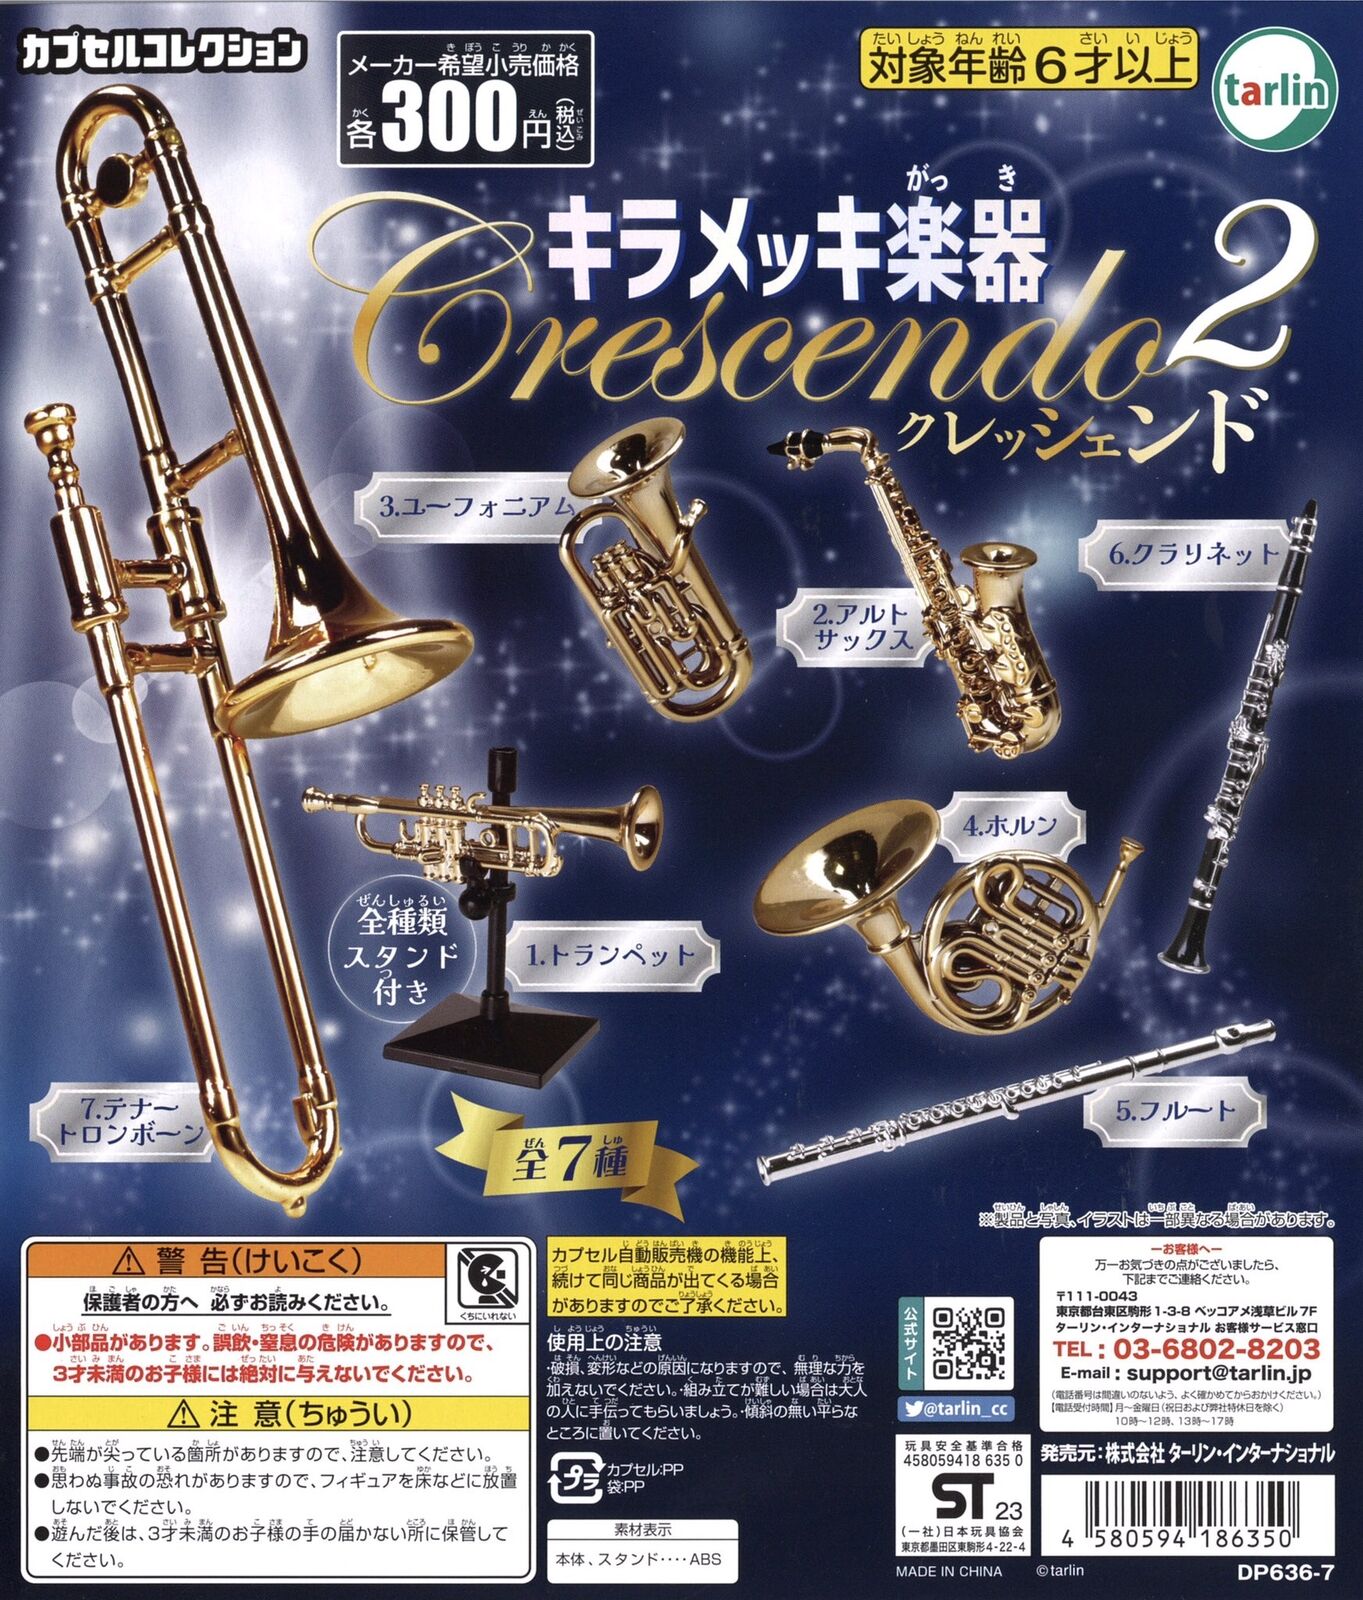 Kira-plated musical instrument Crescendo 2 7types Gacha Complete Capsule 113Y